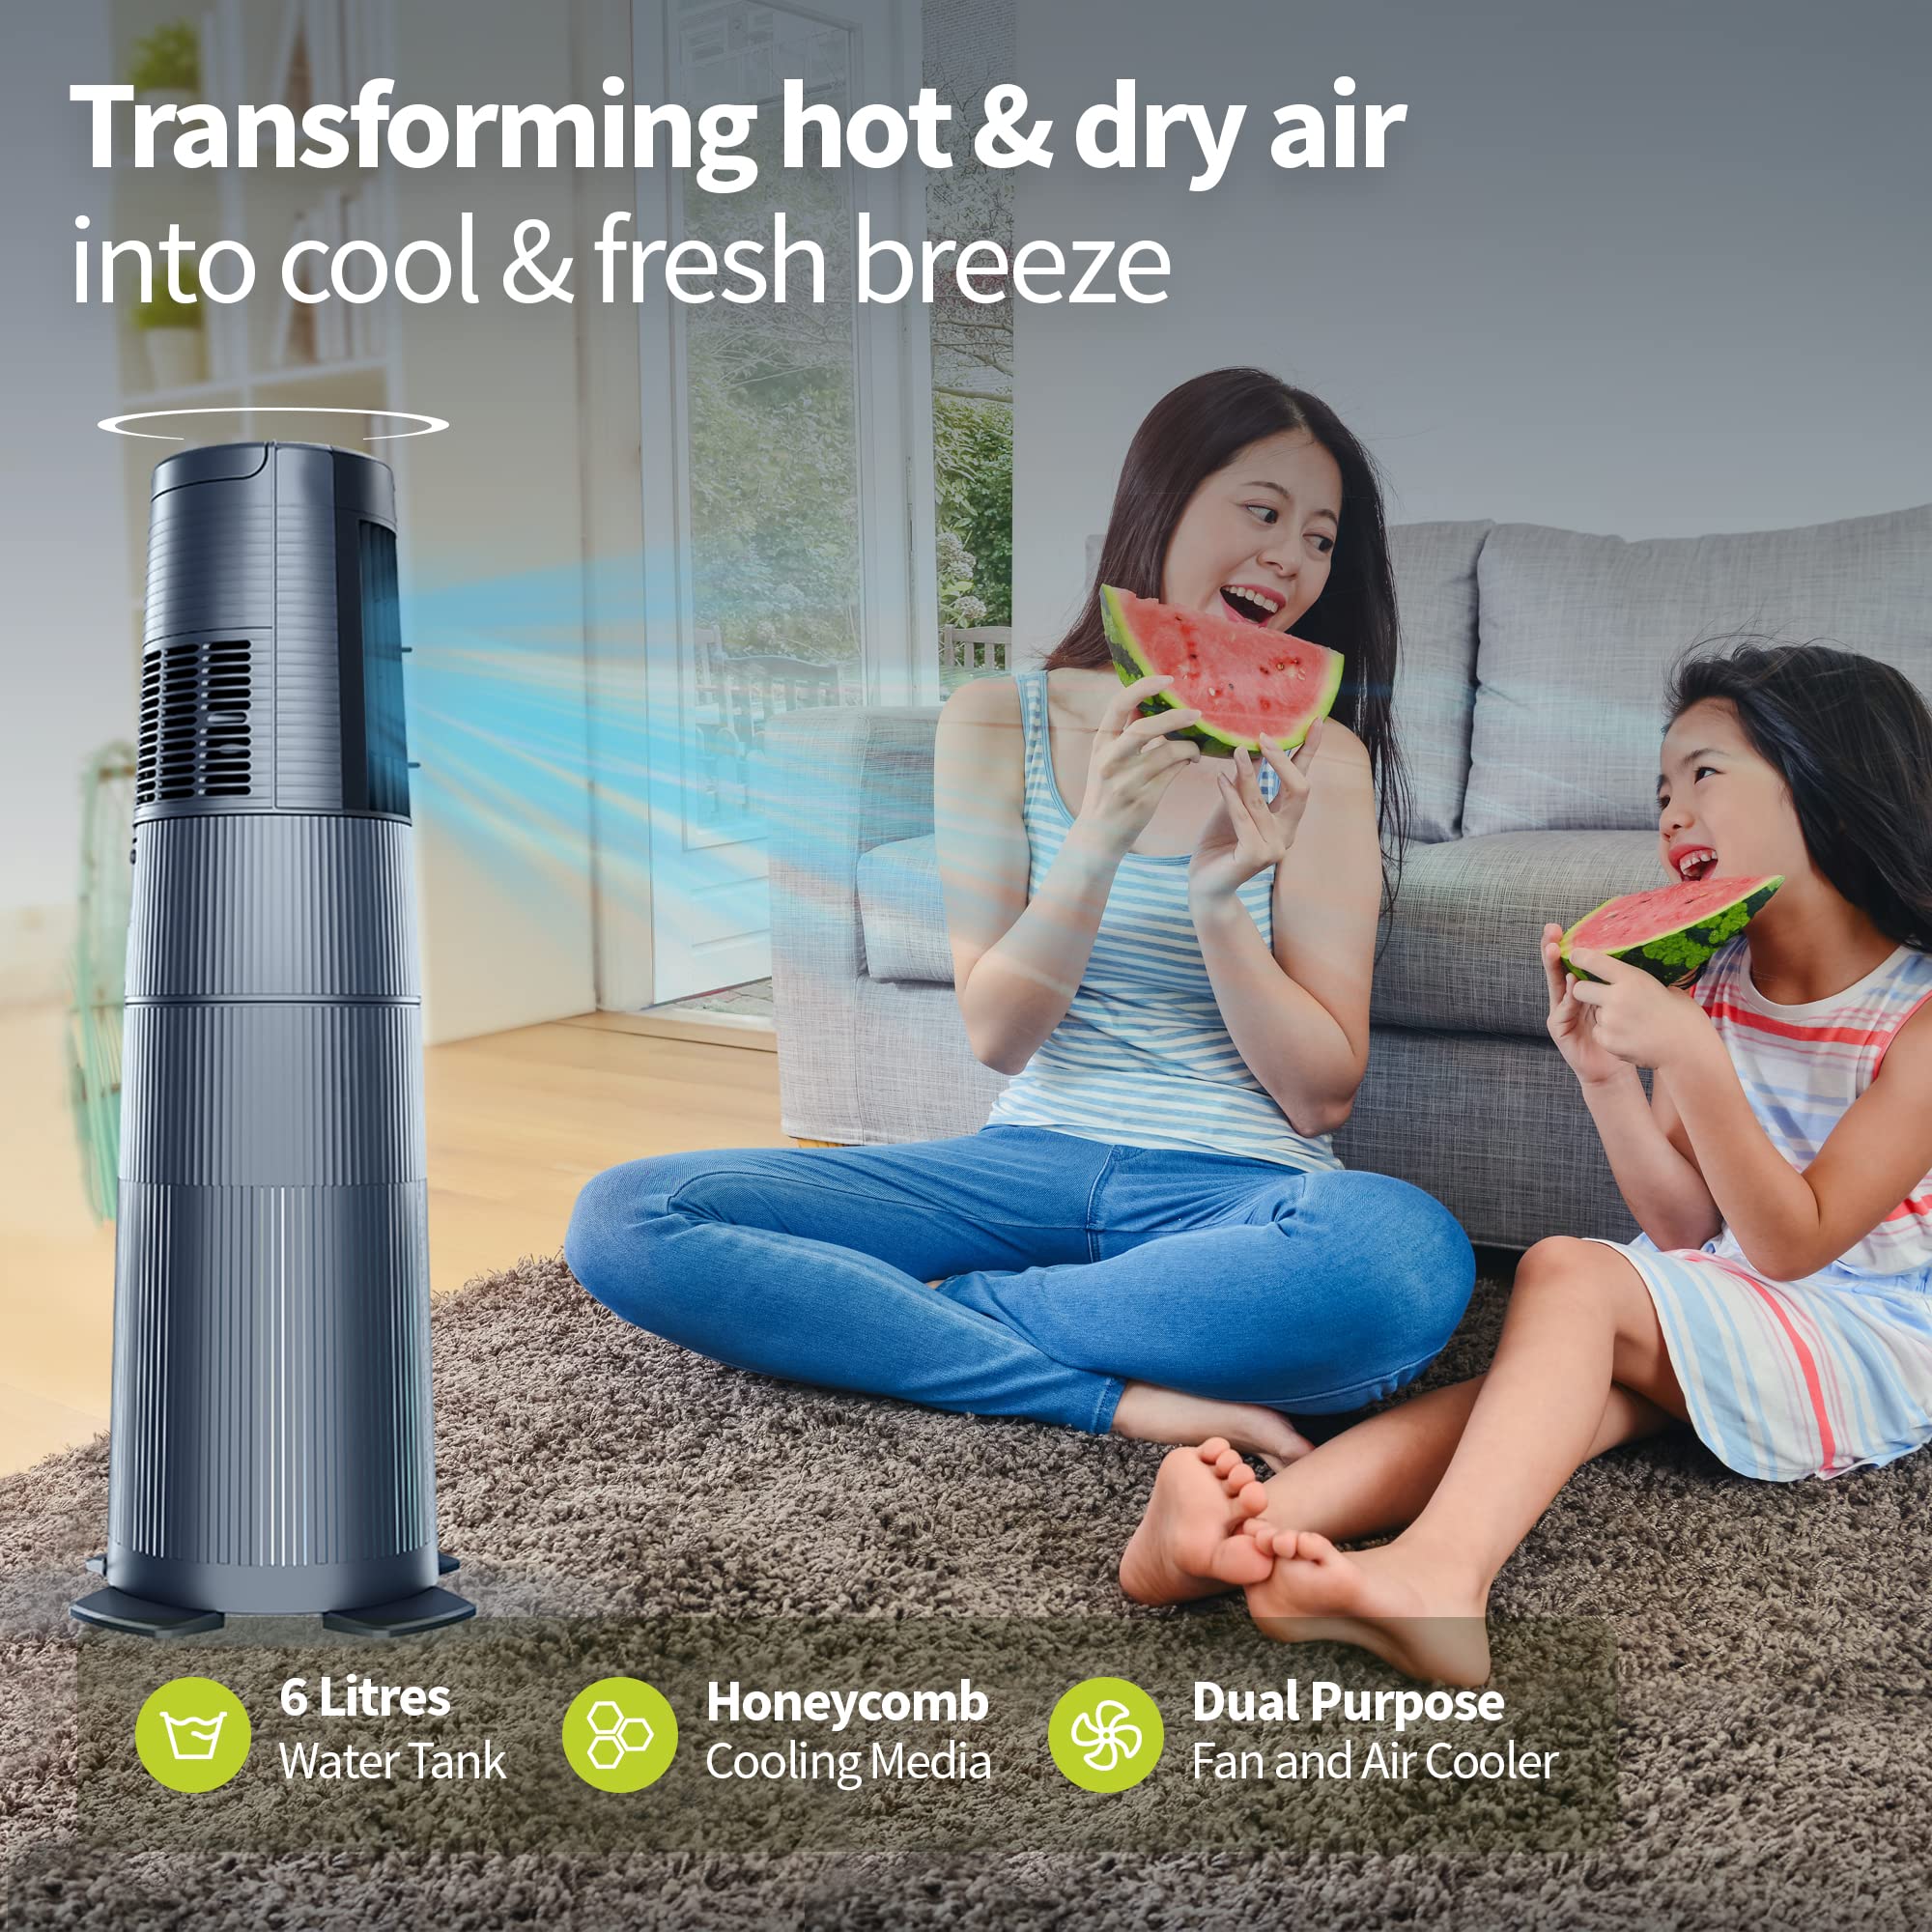 Symphony Duet i-S Personal Tower Cooling Fan For Home and Office with Honeycomb Pad, Powerful Blower, Auto Rotation and Low Power Consumption (6L, Grey)